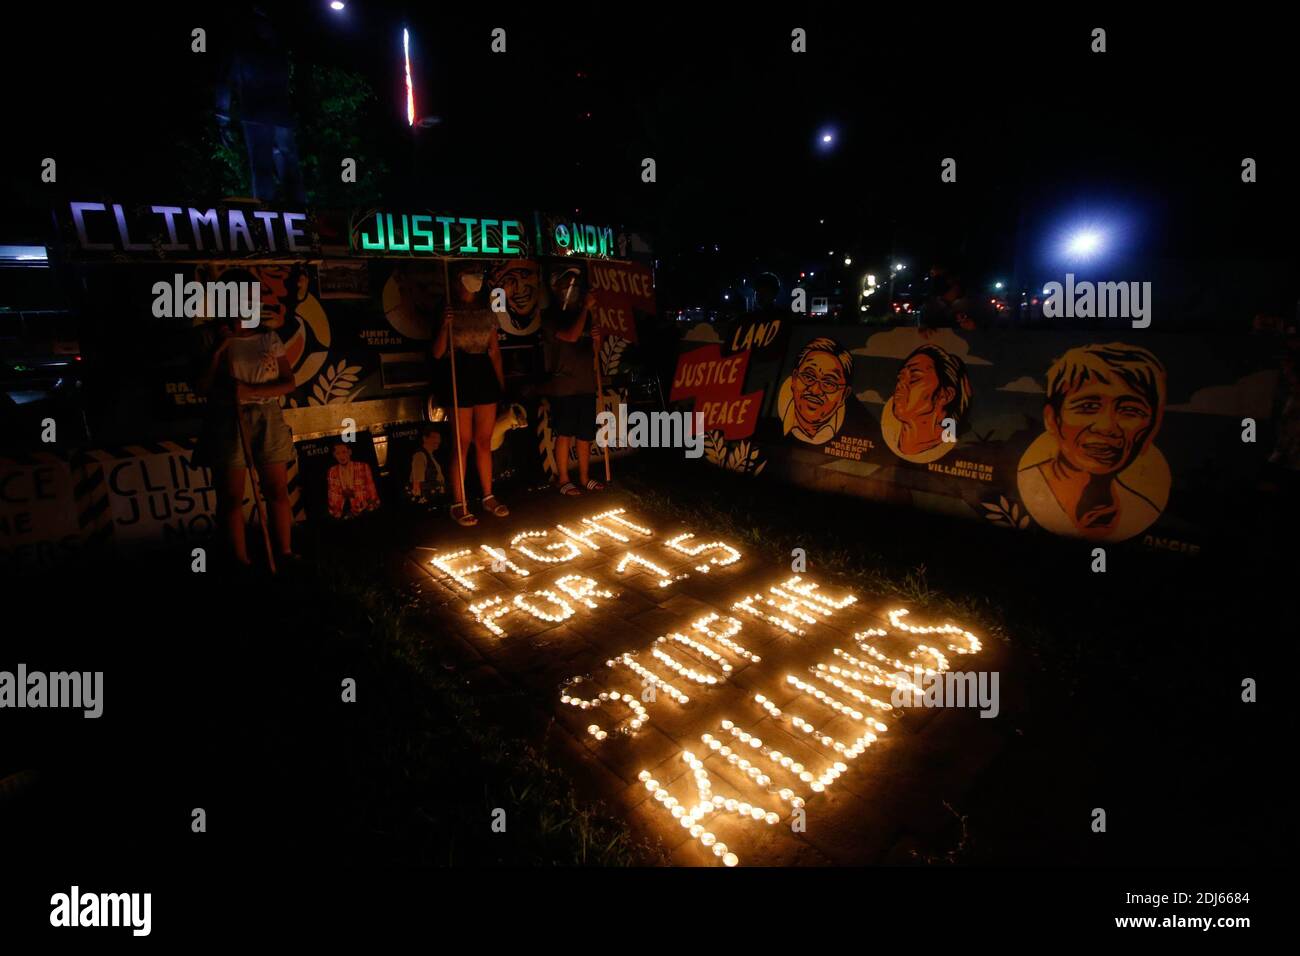 Climate activists lit candles and held LED lighting banners on December 11th 2020. This activity commemorates the five year anniversary of the Paris Agreement with a call to fight for 1.5 and to end the killing of environmental defenders. Quezon City, Philippines. Stock Photo